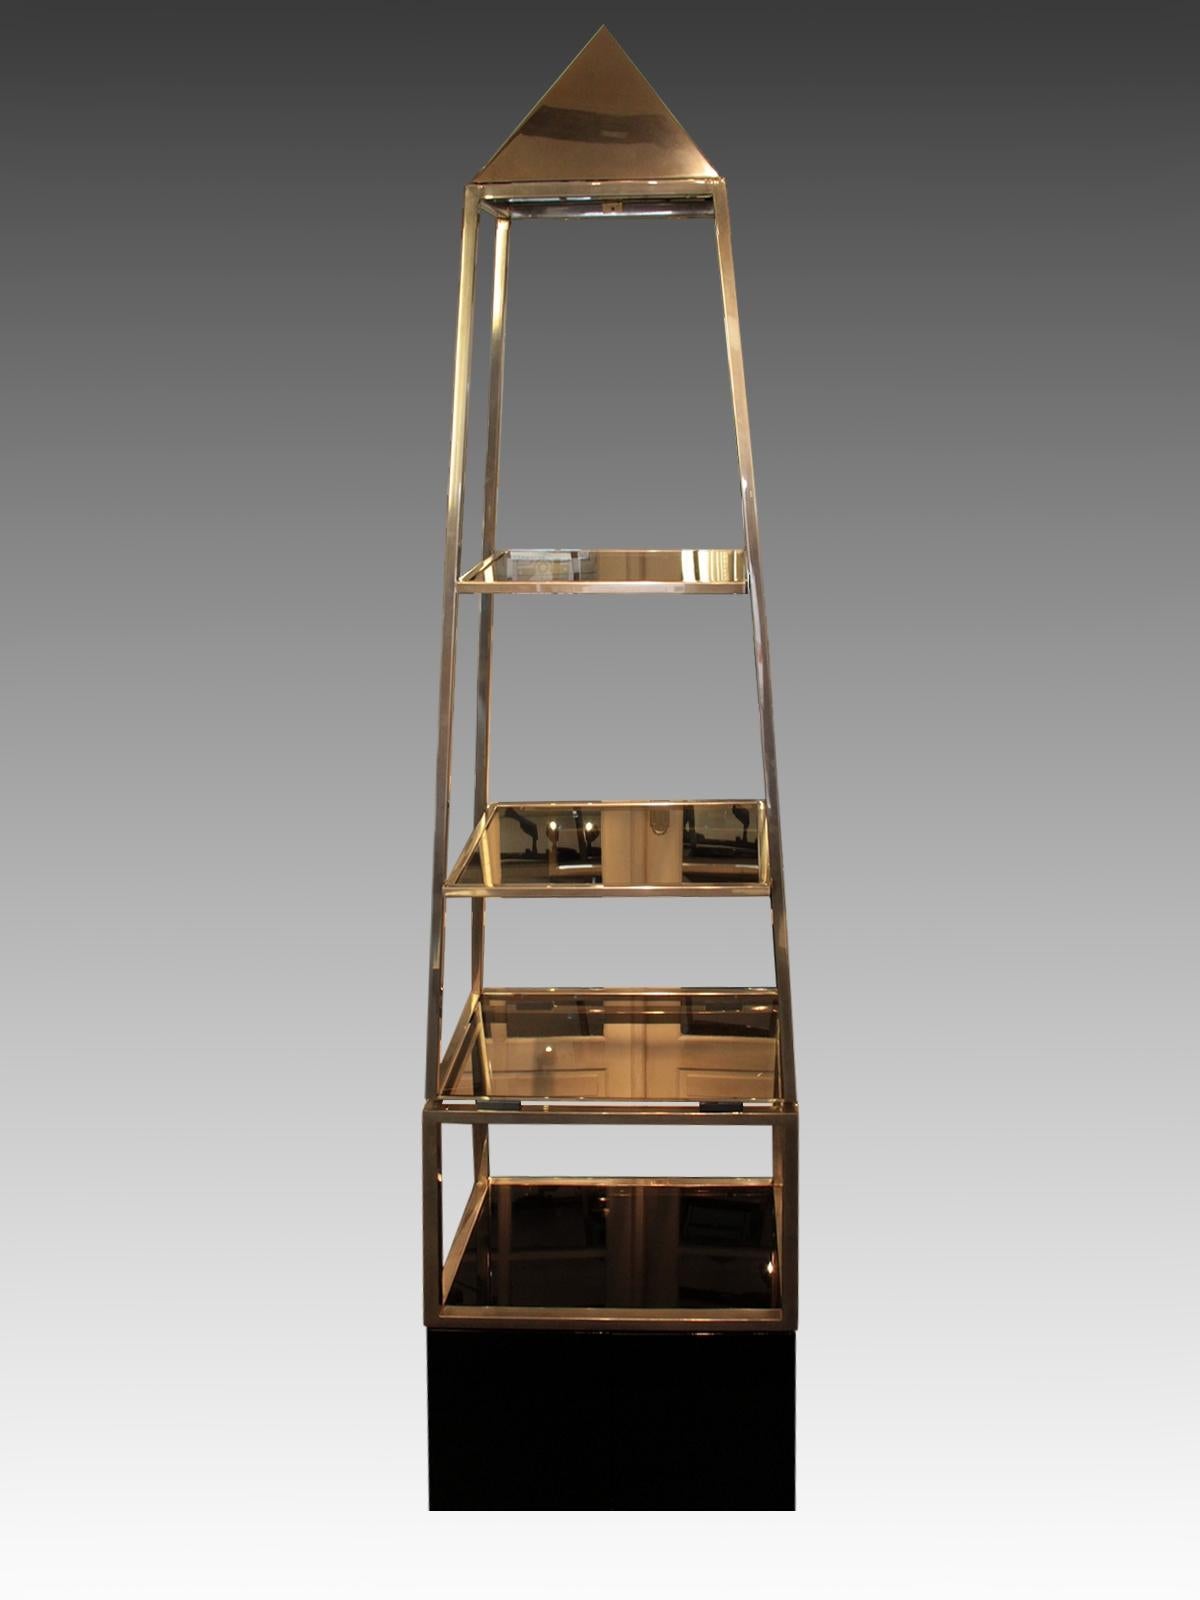 Rare pair of pyramid-shaped shelves, made by Maison Jansen, circa 1970.
Visible on all four sides and can be placed in the middle of a room, they are made of square nickel-plated brass tube on a base opening with two doors in black lacquered wood.